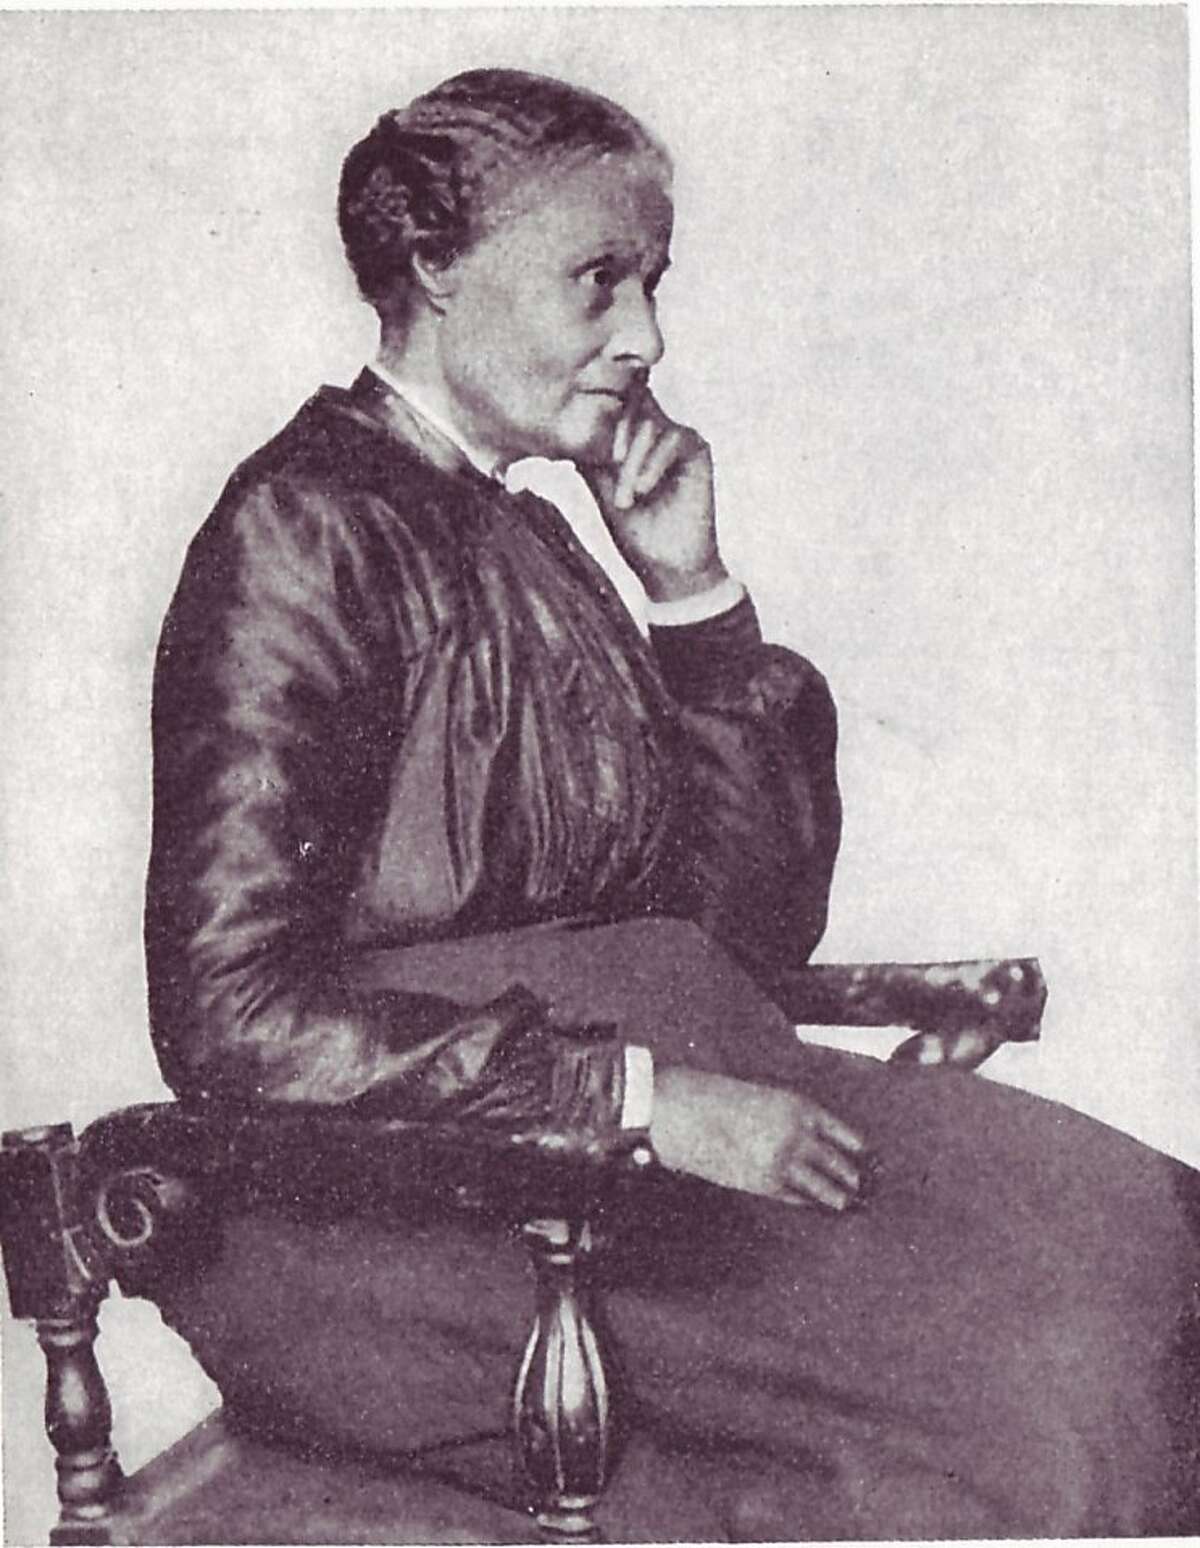 Mary Ellen Pleasant at 87. The photo appeared in her 1902 autobiography. Pleasant was born into slavery and became a successful businesswoman and an advocate for equal rights, fighting for integration on San Francisco cable cars. She was called by some the "mother of civil rights in California."